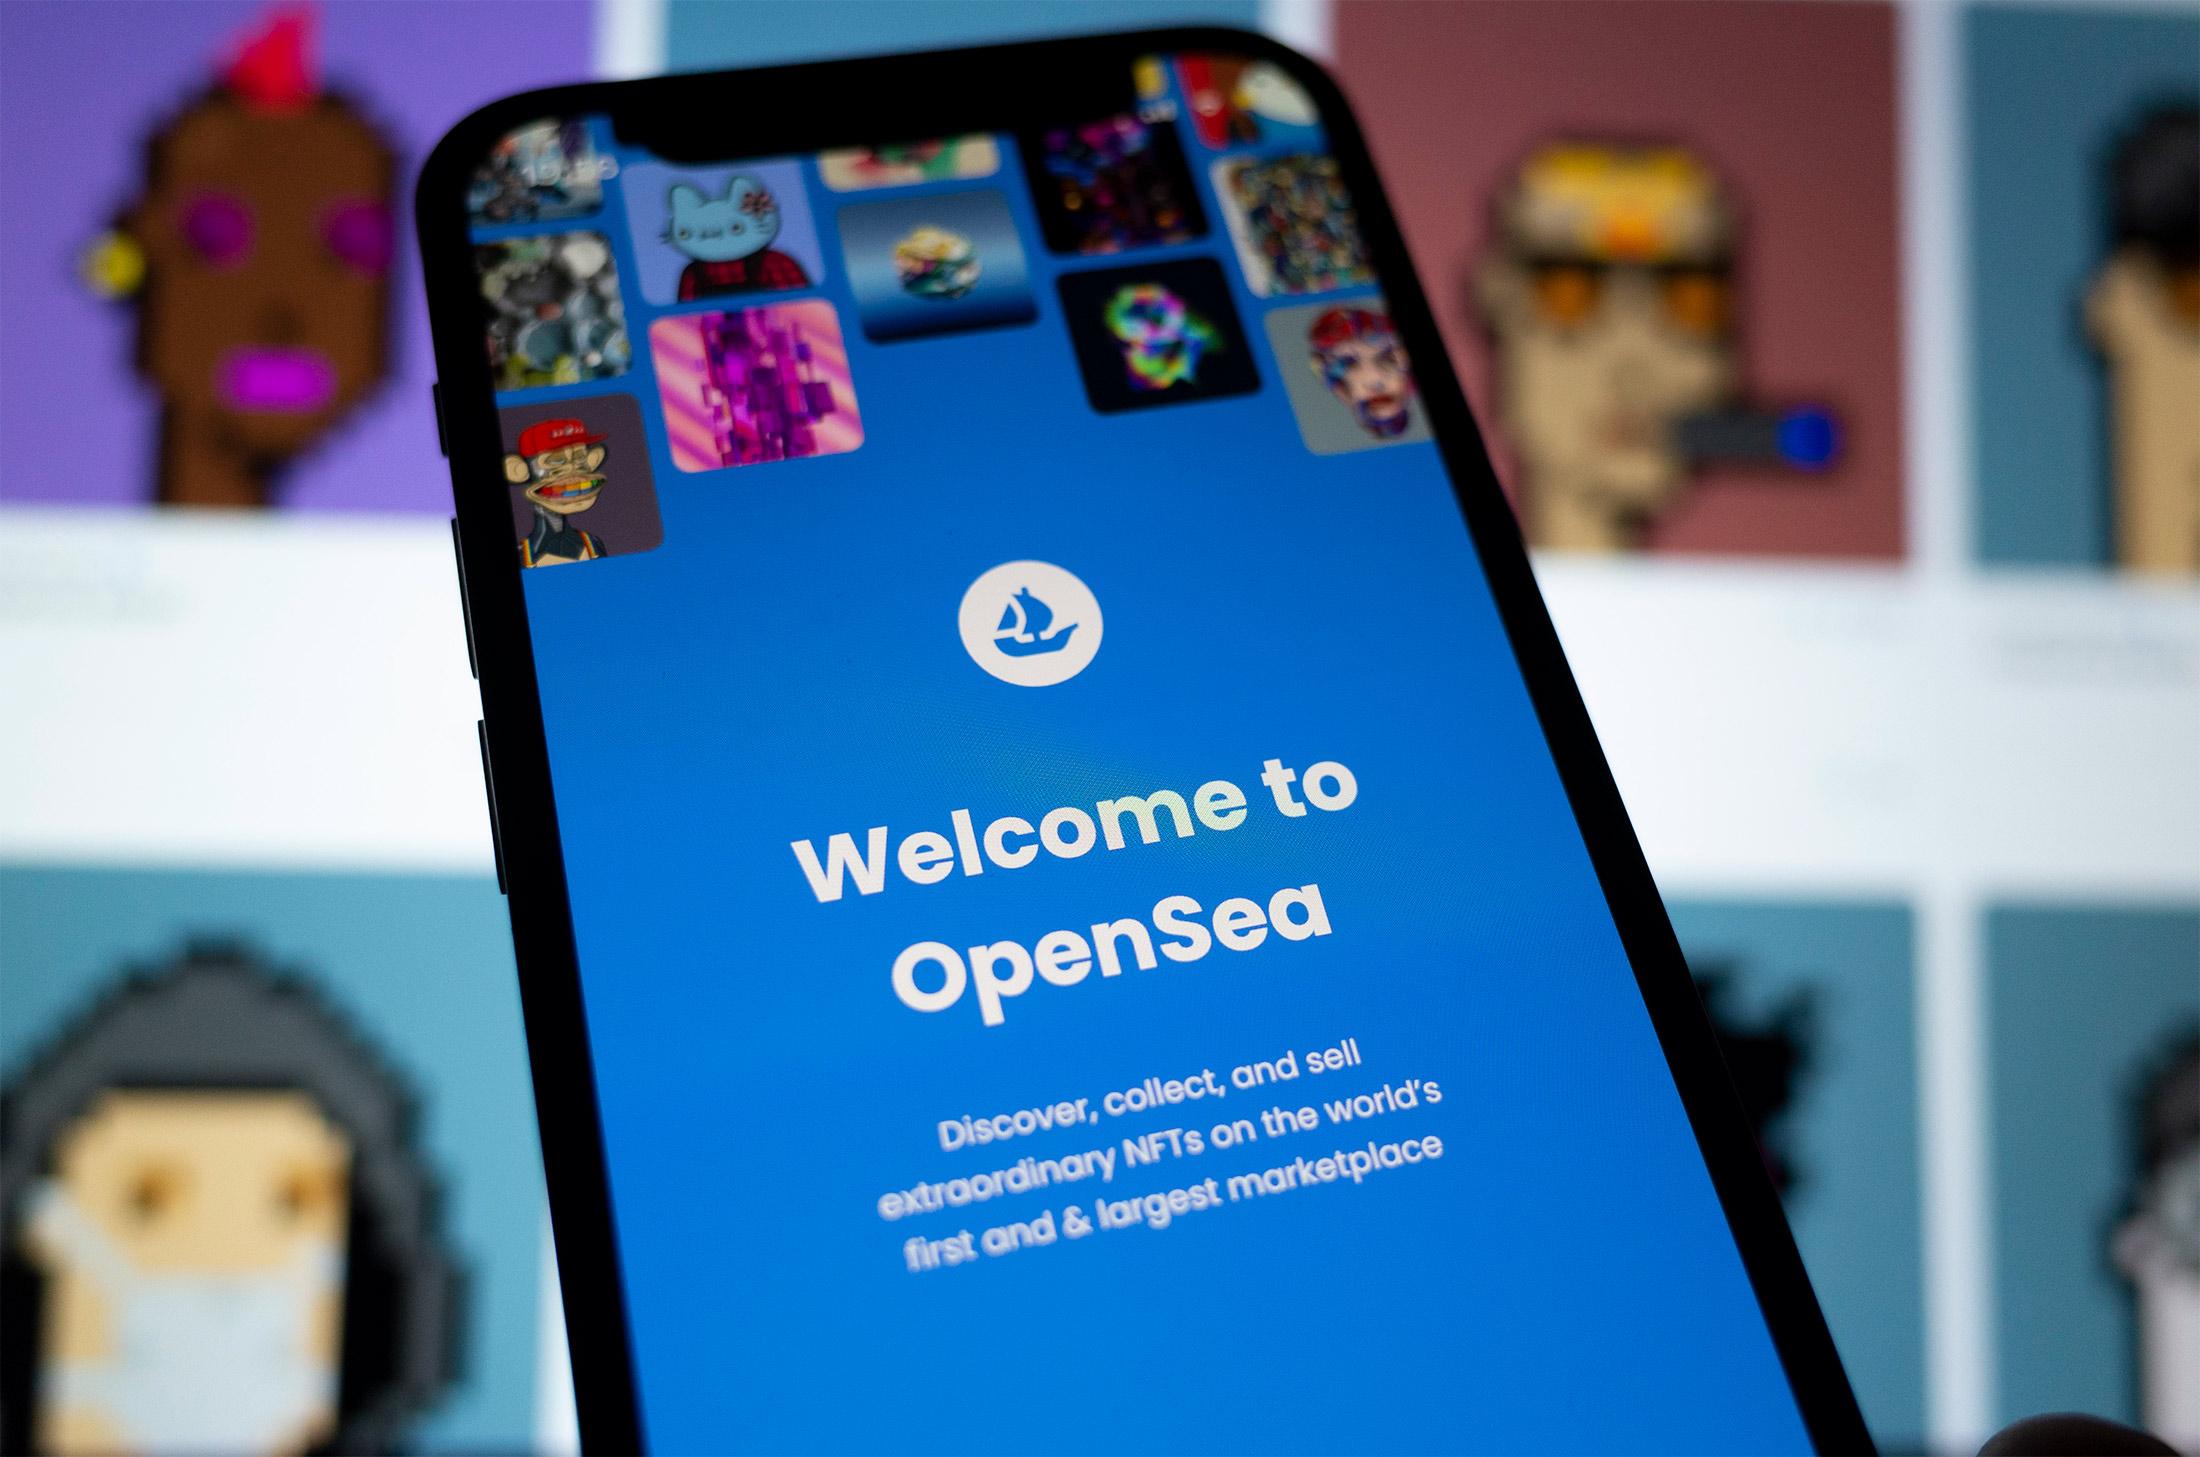 OpenSea announced new categories and tags; Excited to start showcasing them